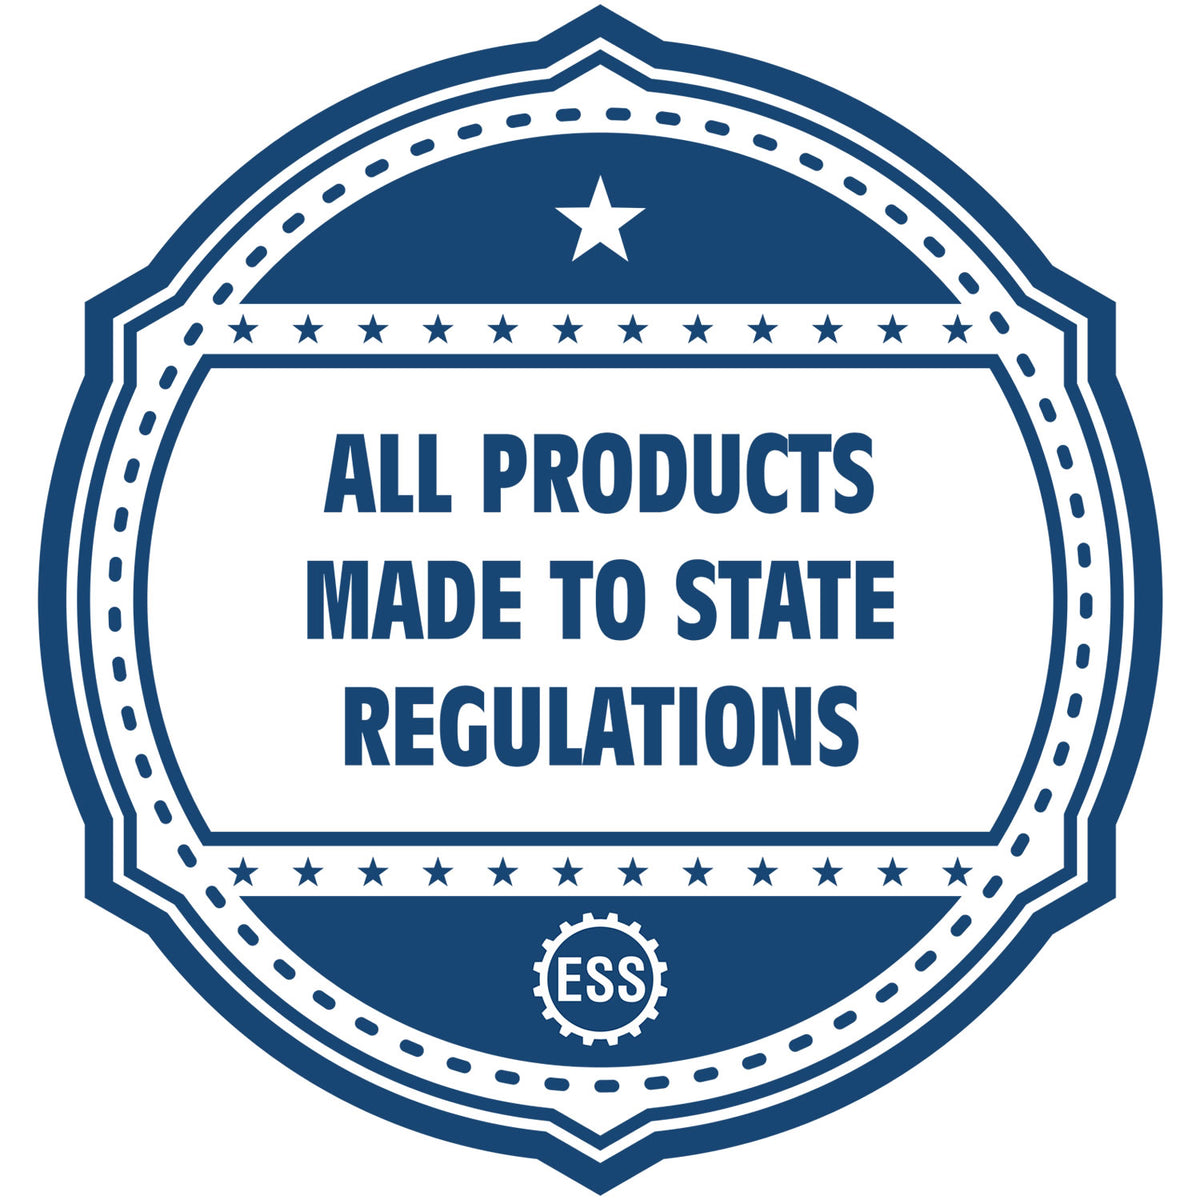 An icon or badge element for the PSI Georgia Notary Stamp showing that this product is made in compliance with state regulations.